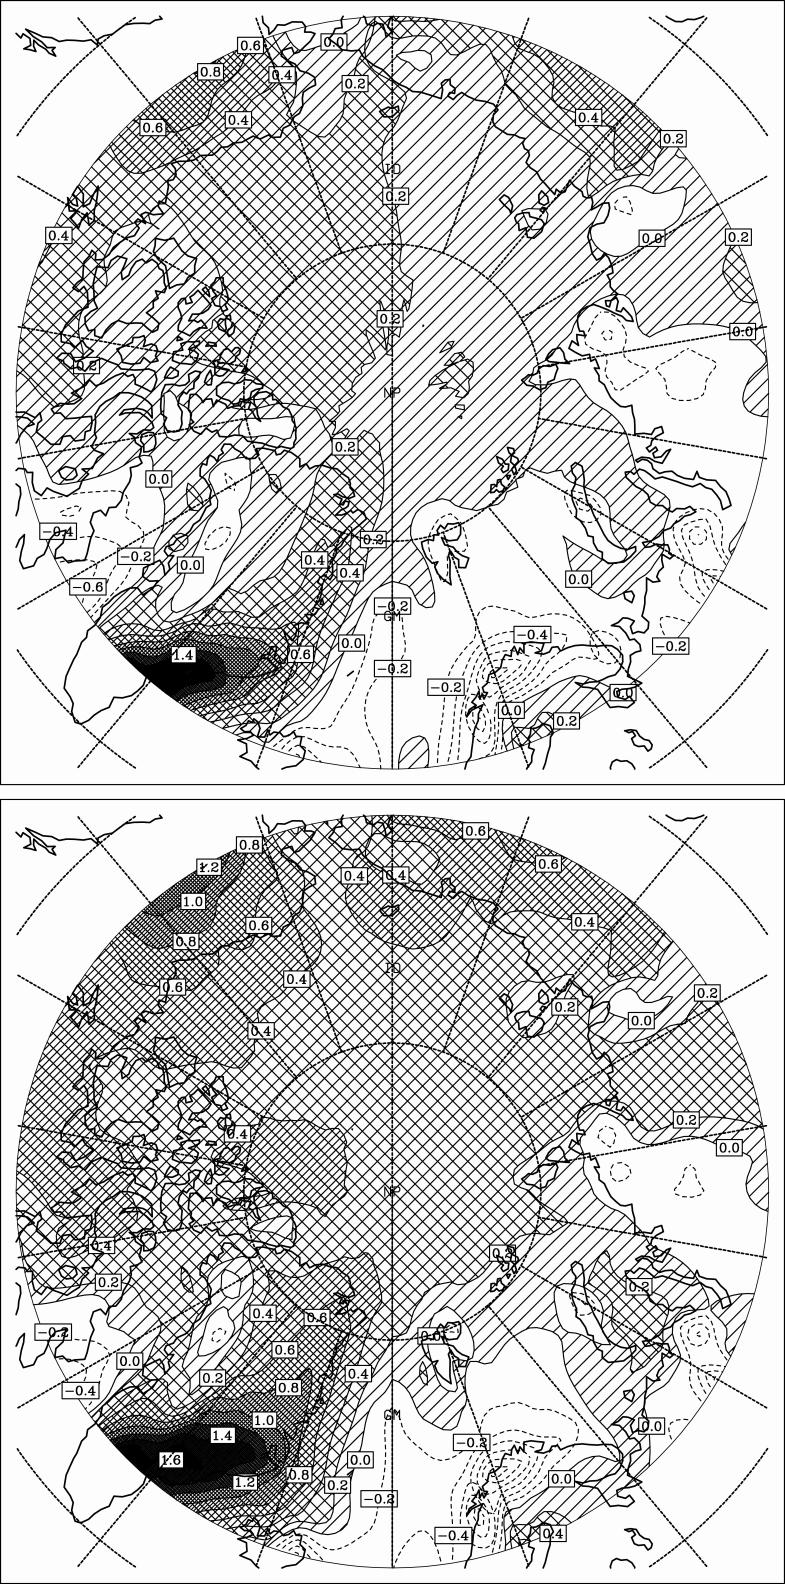 Biases (model minus observed, in mm day -1 ) of (top) the AMIP-II composite annual mean precipitation, and (bottom) the IPCC composite annual mean precipitation.